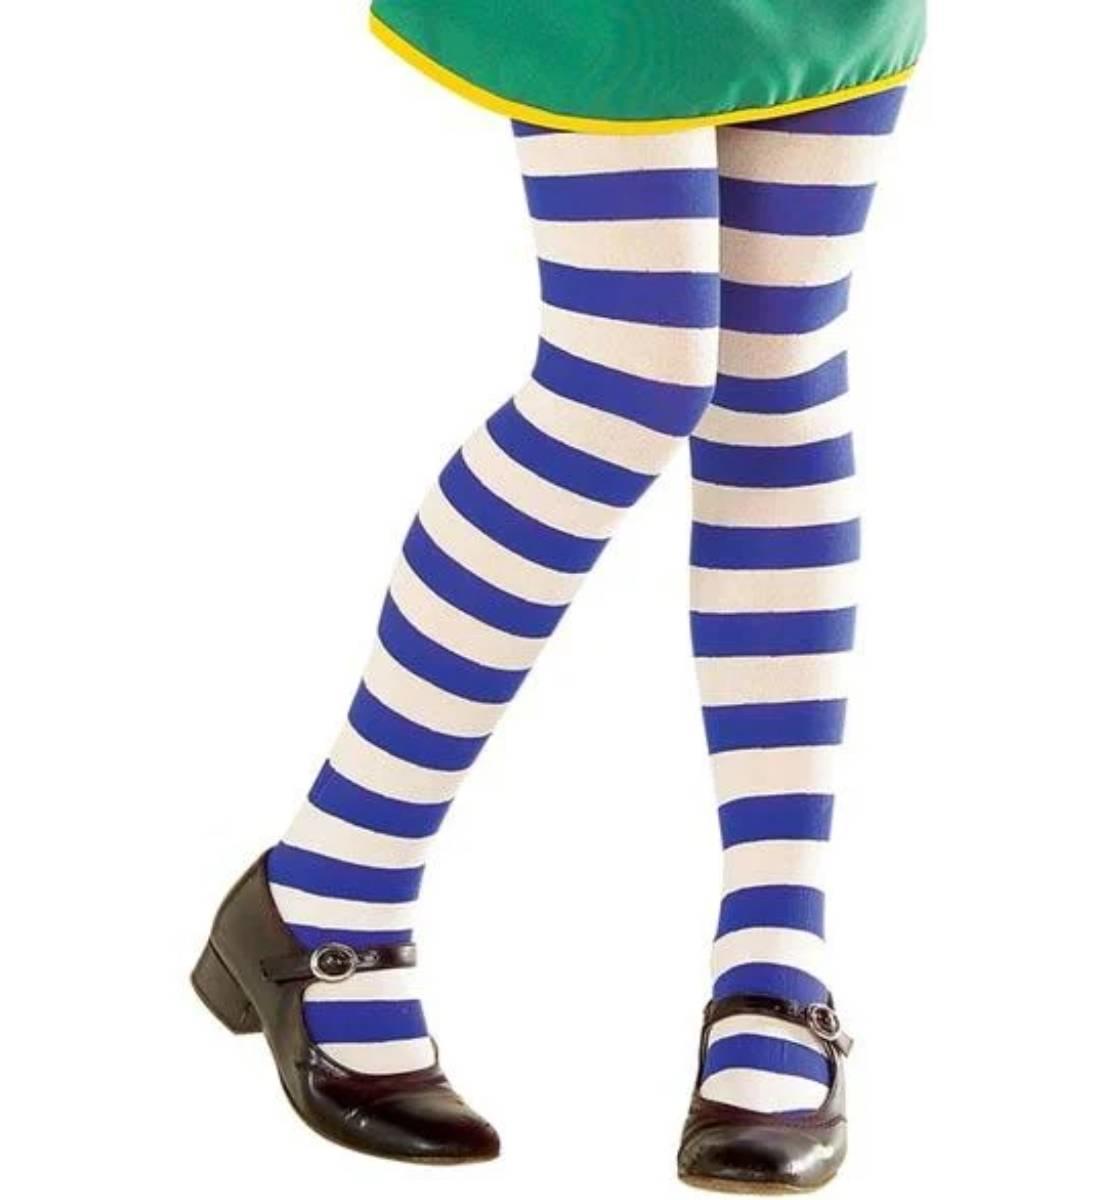 Children's Blue and White Striped Tights by Widmann in sml, med and large